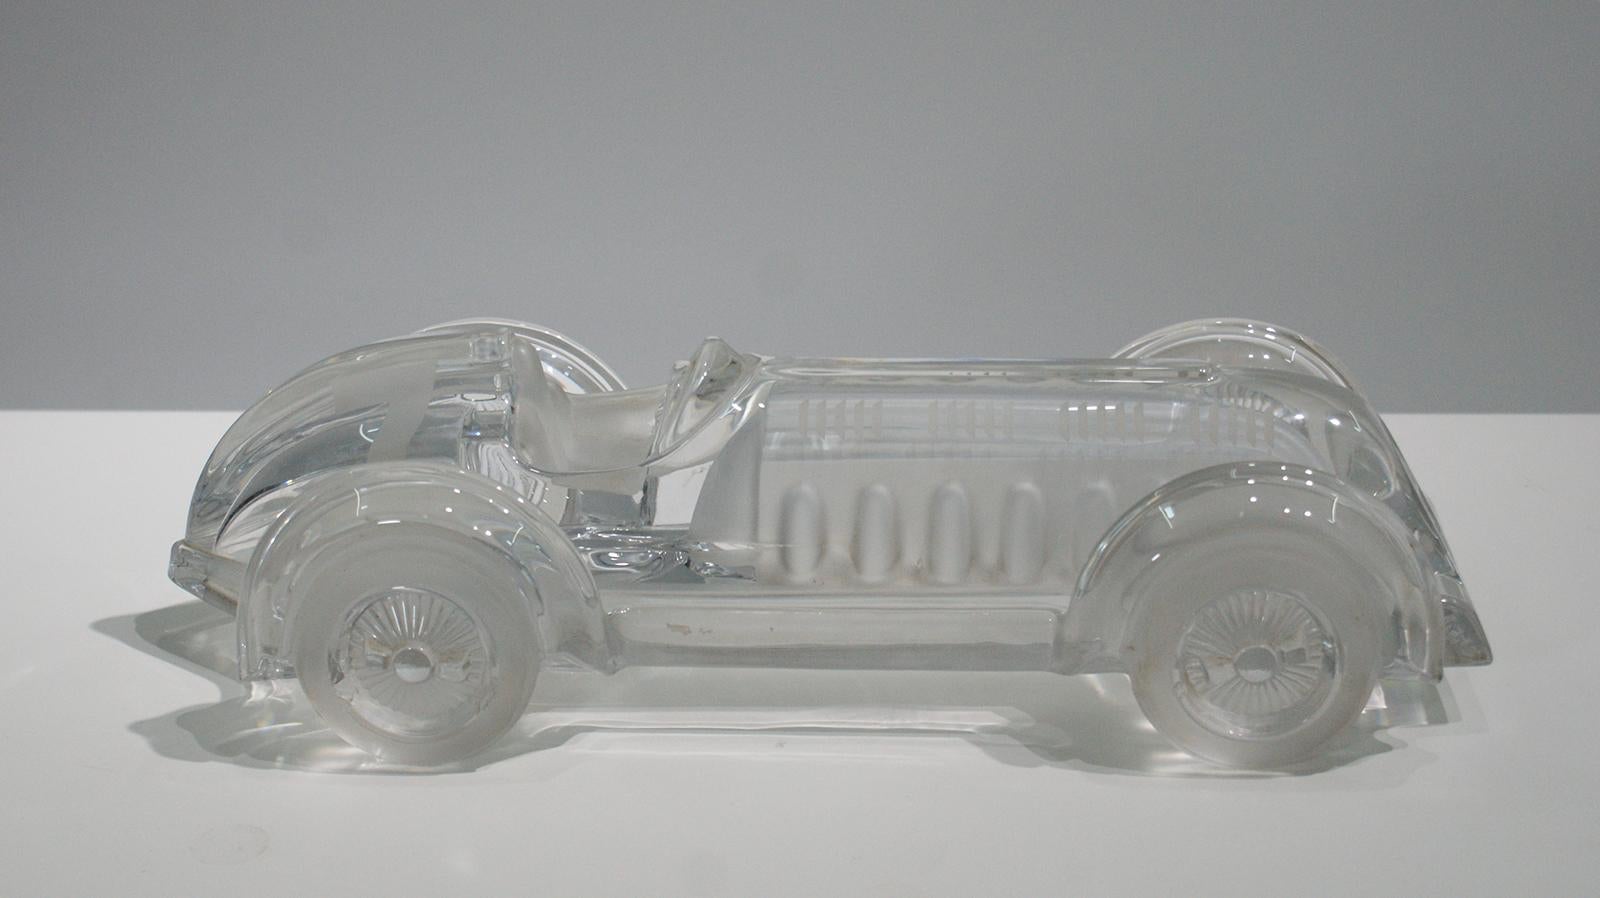 Mid-Century Modern Signed Daum France, Crystal Sculpture of Vintage Race Car in Limited Edition